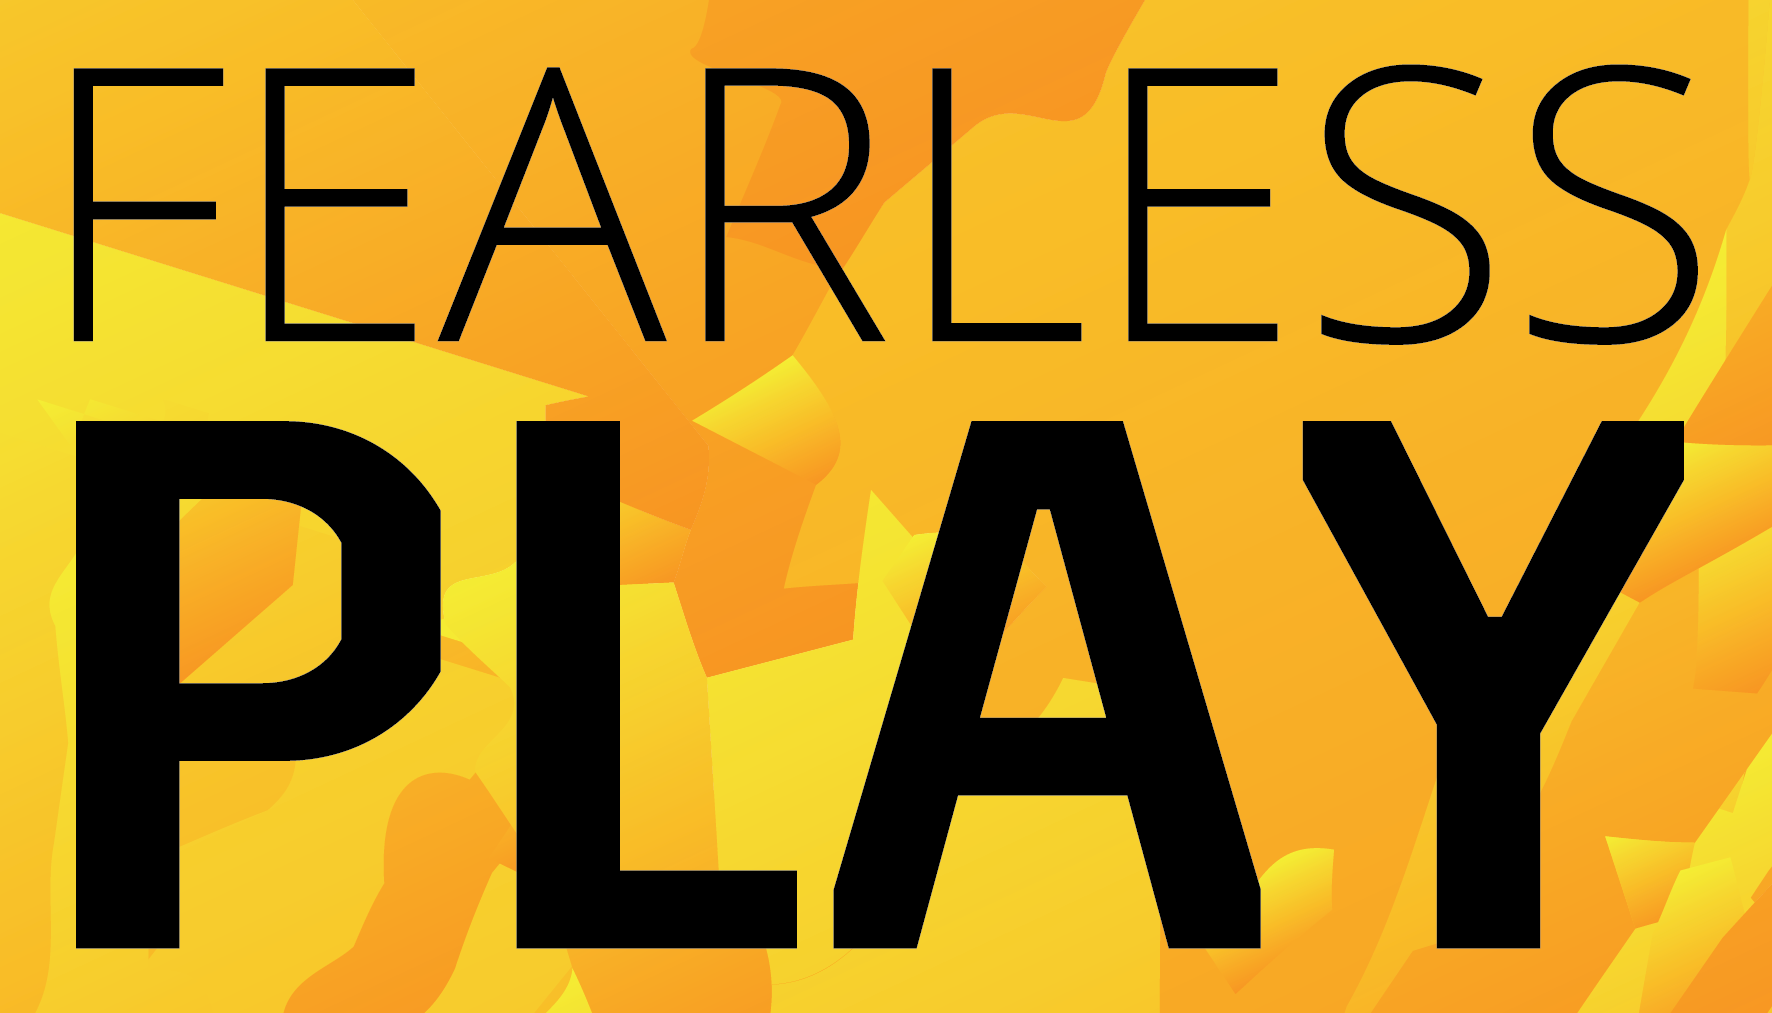 Fearless Play